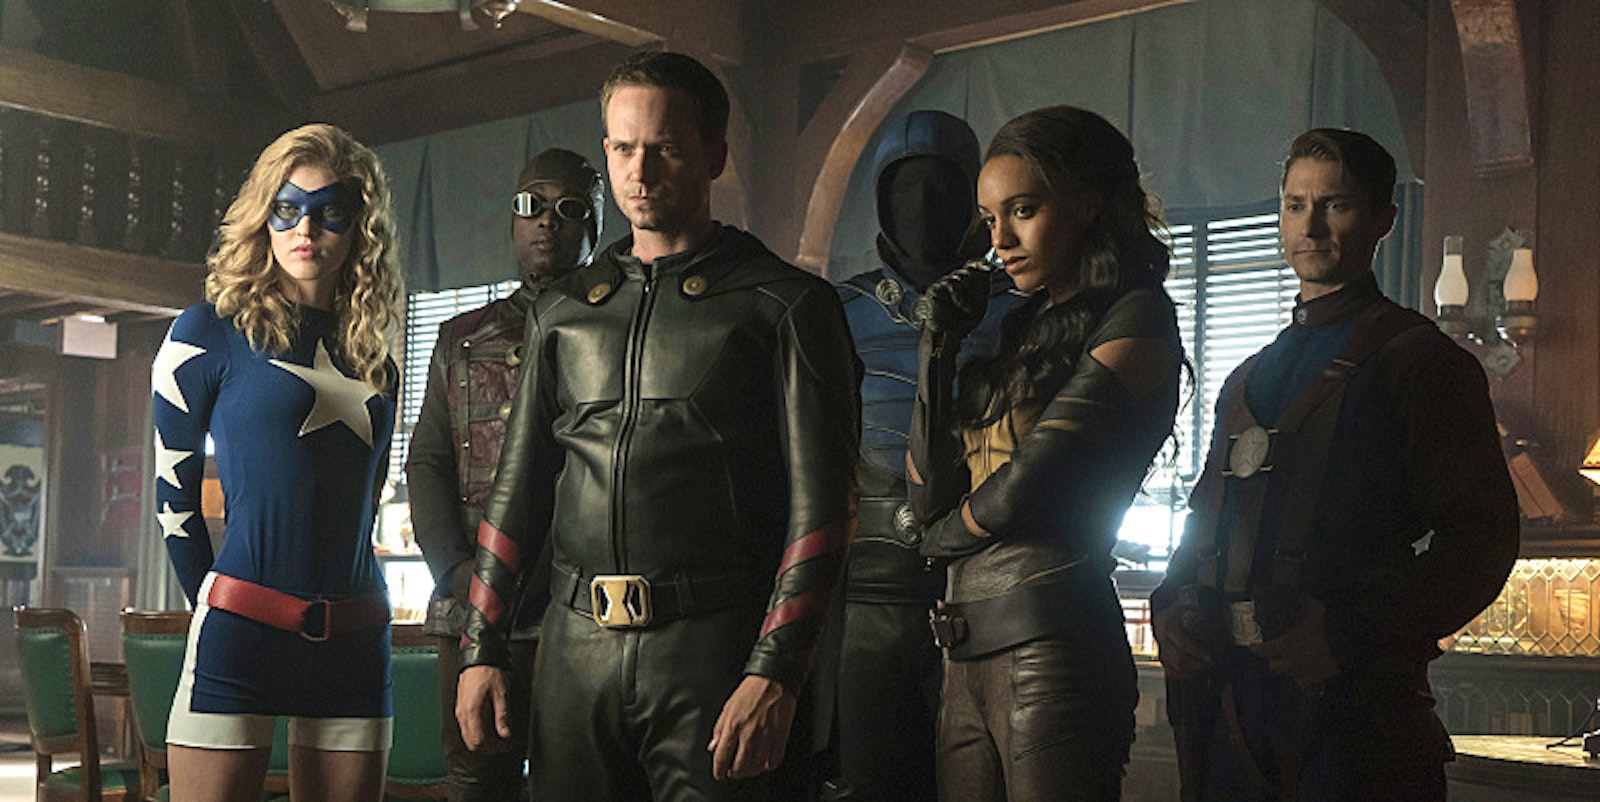 New Legends Of Tomorrow Photos Debut A Modern Take On Costumes Inverse 2161